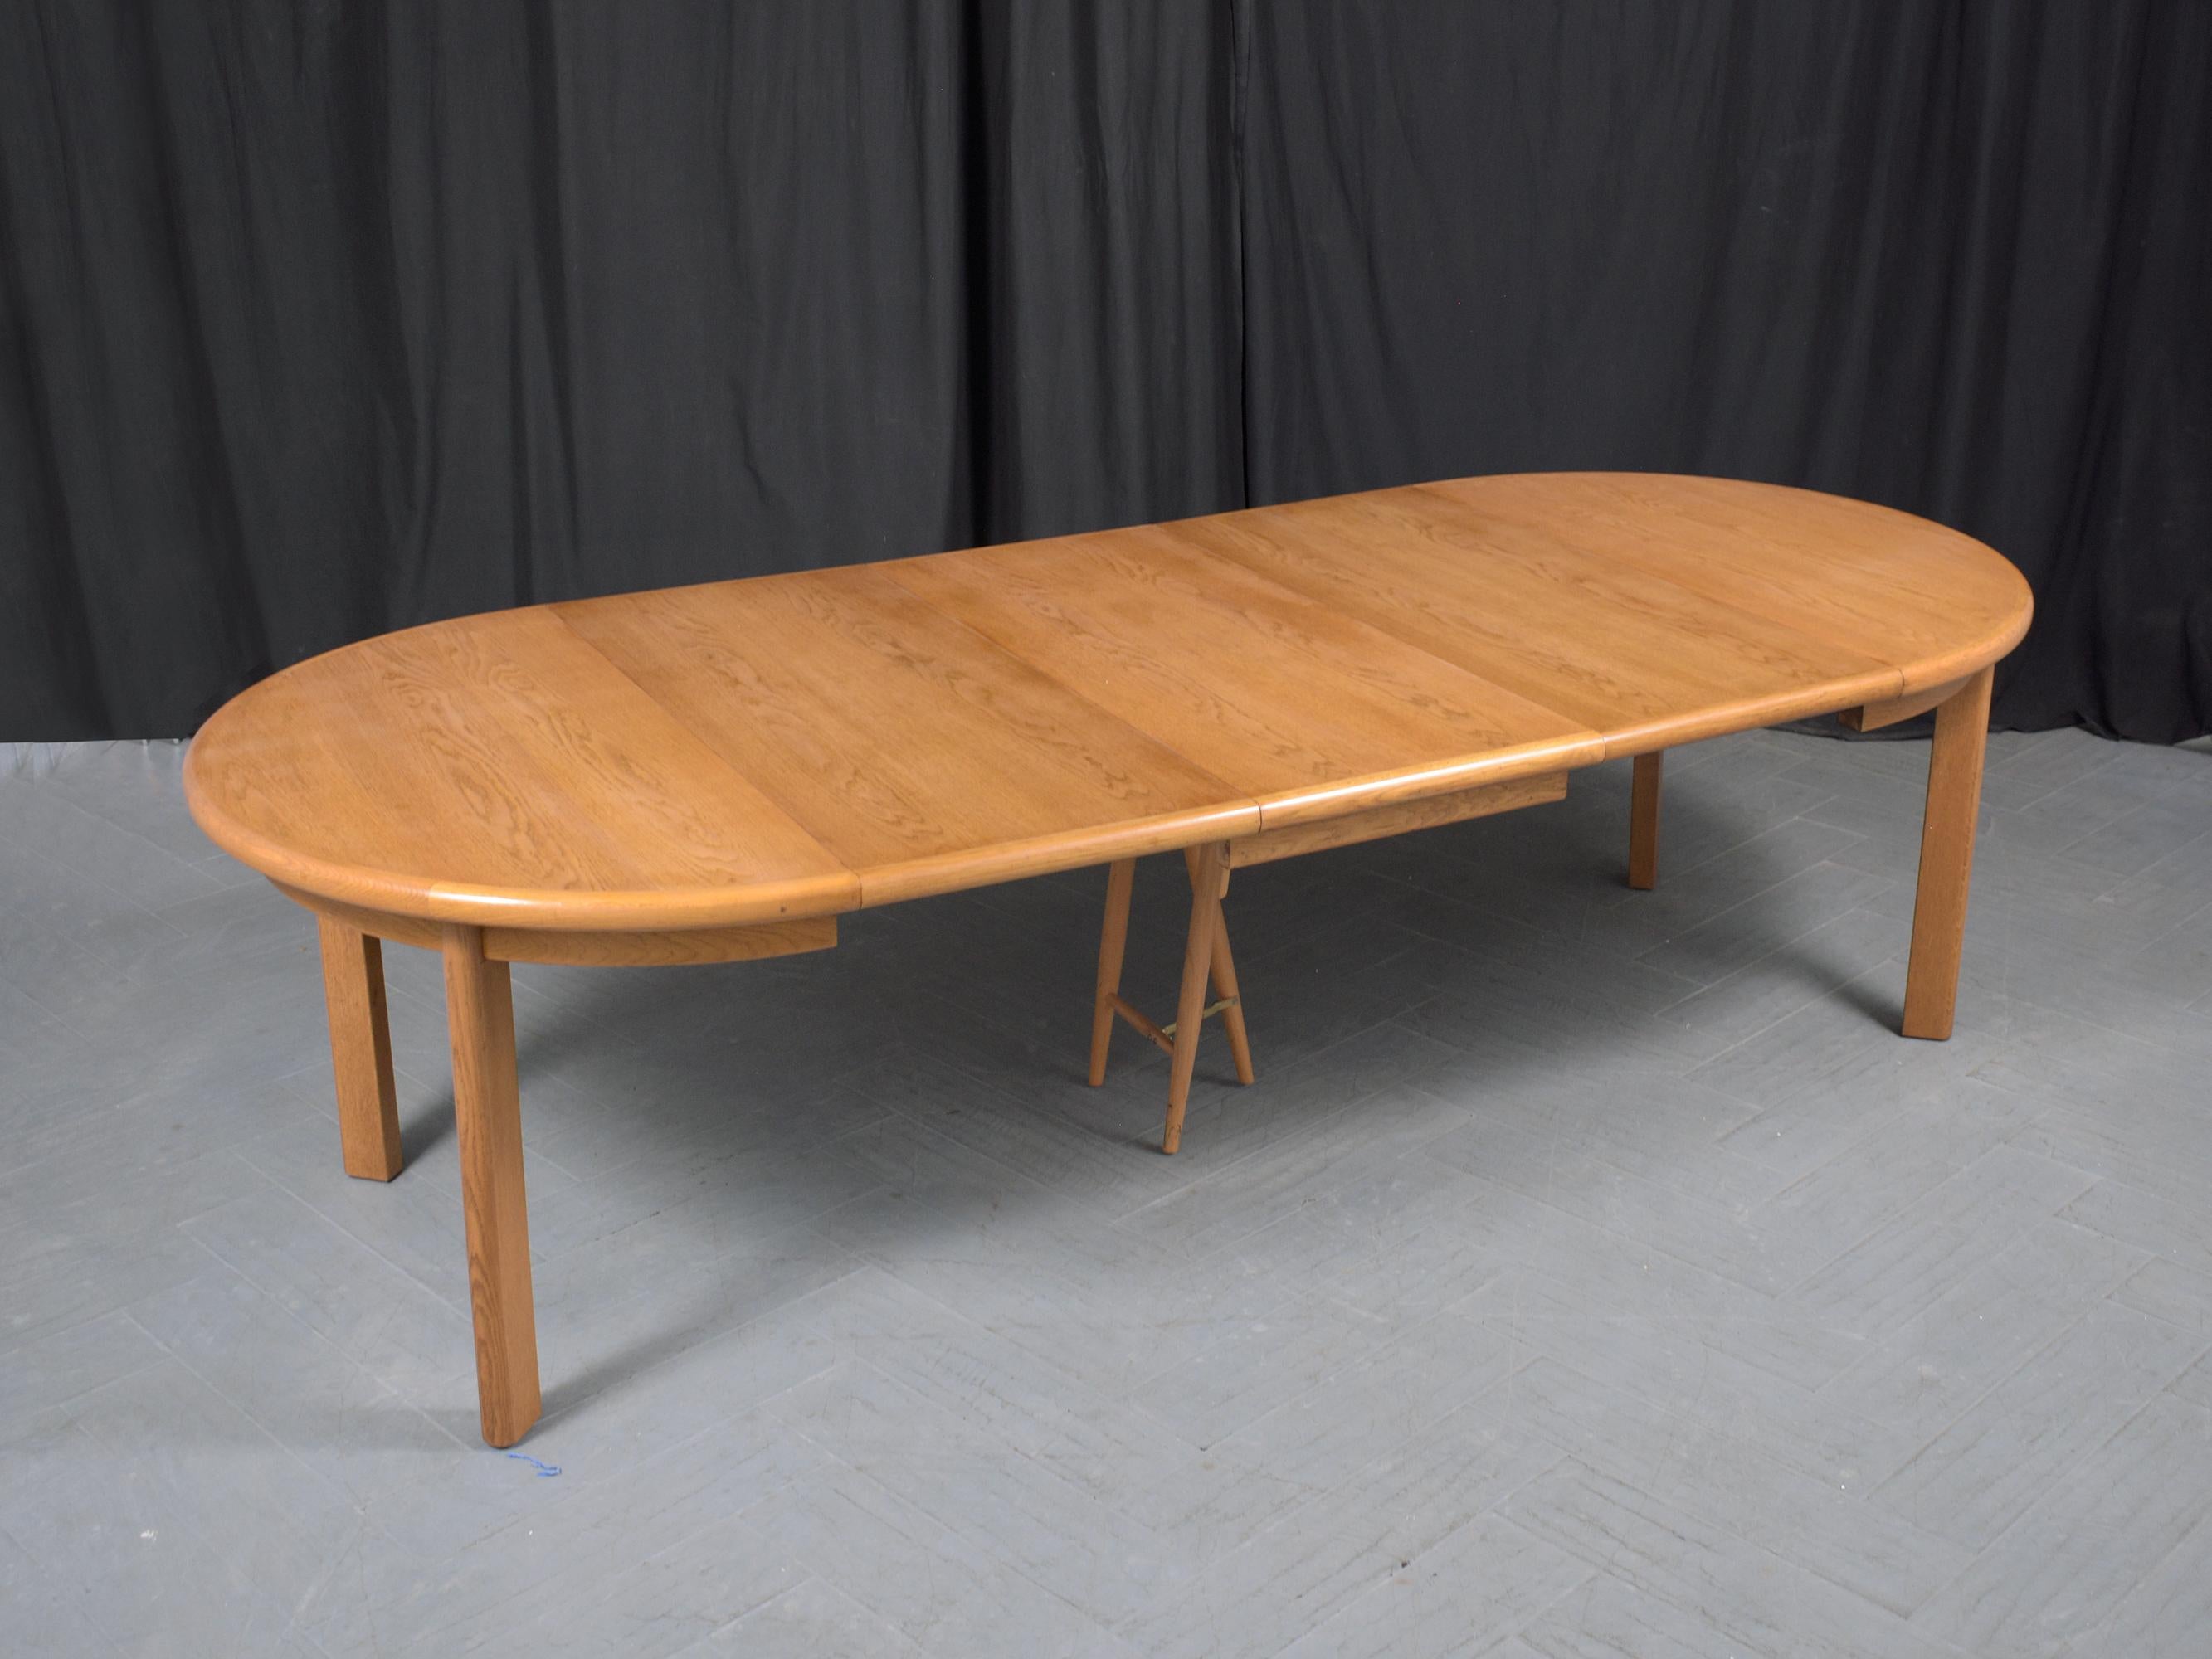 Hand-Crafted 1970s Danish Modern Teak Dining Table with Extendable Leaves For Sale